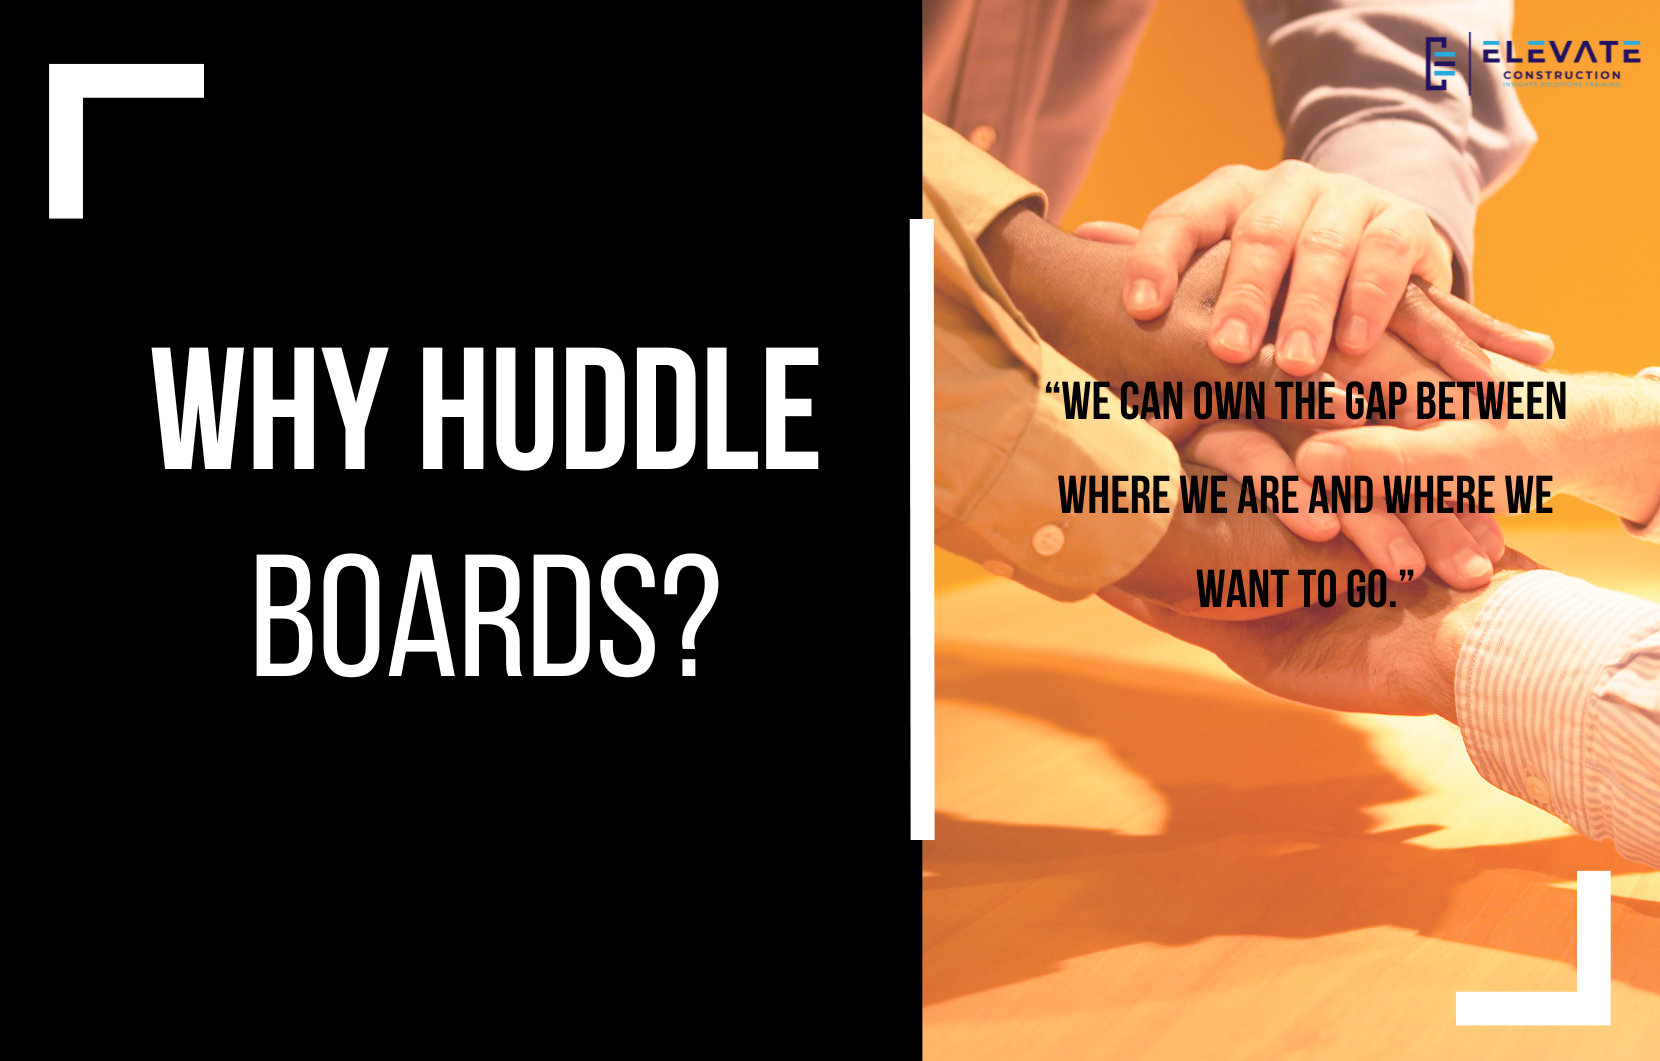 Why Huddle Boards?